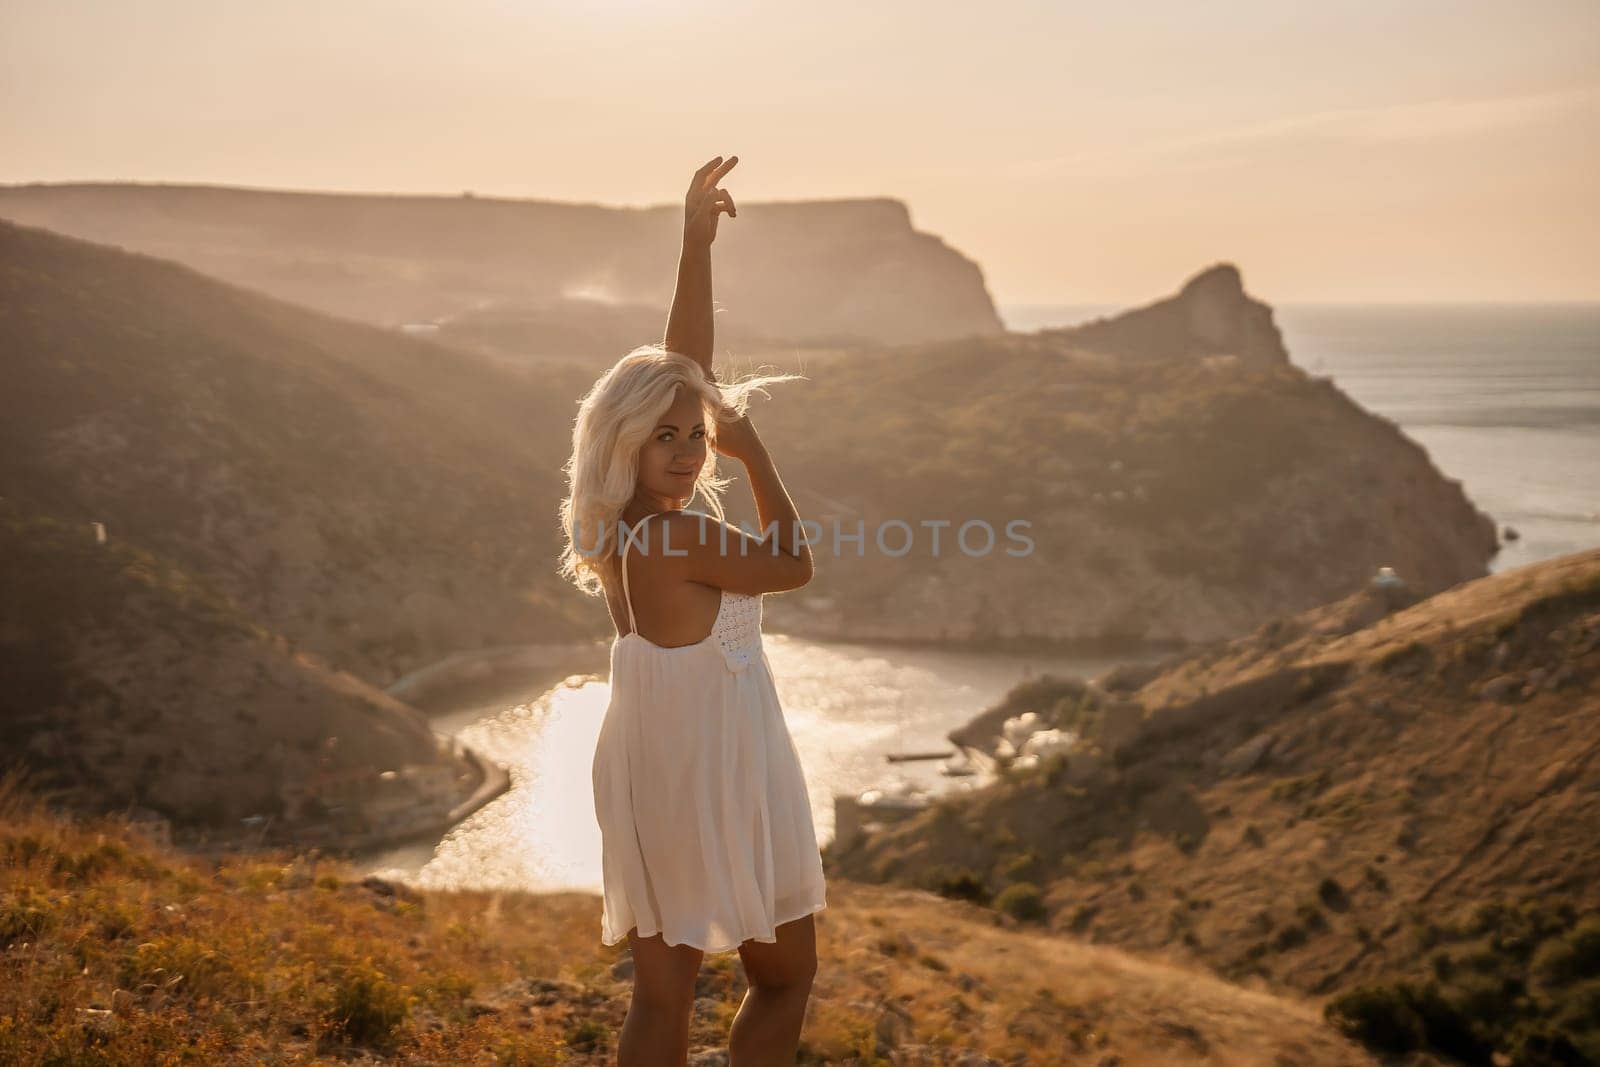 A woman stands on a hill overlooking a body of water. She is wearing a white dress and she is enjoying the view. by Matiunina